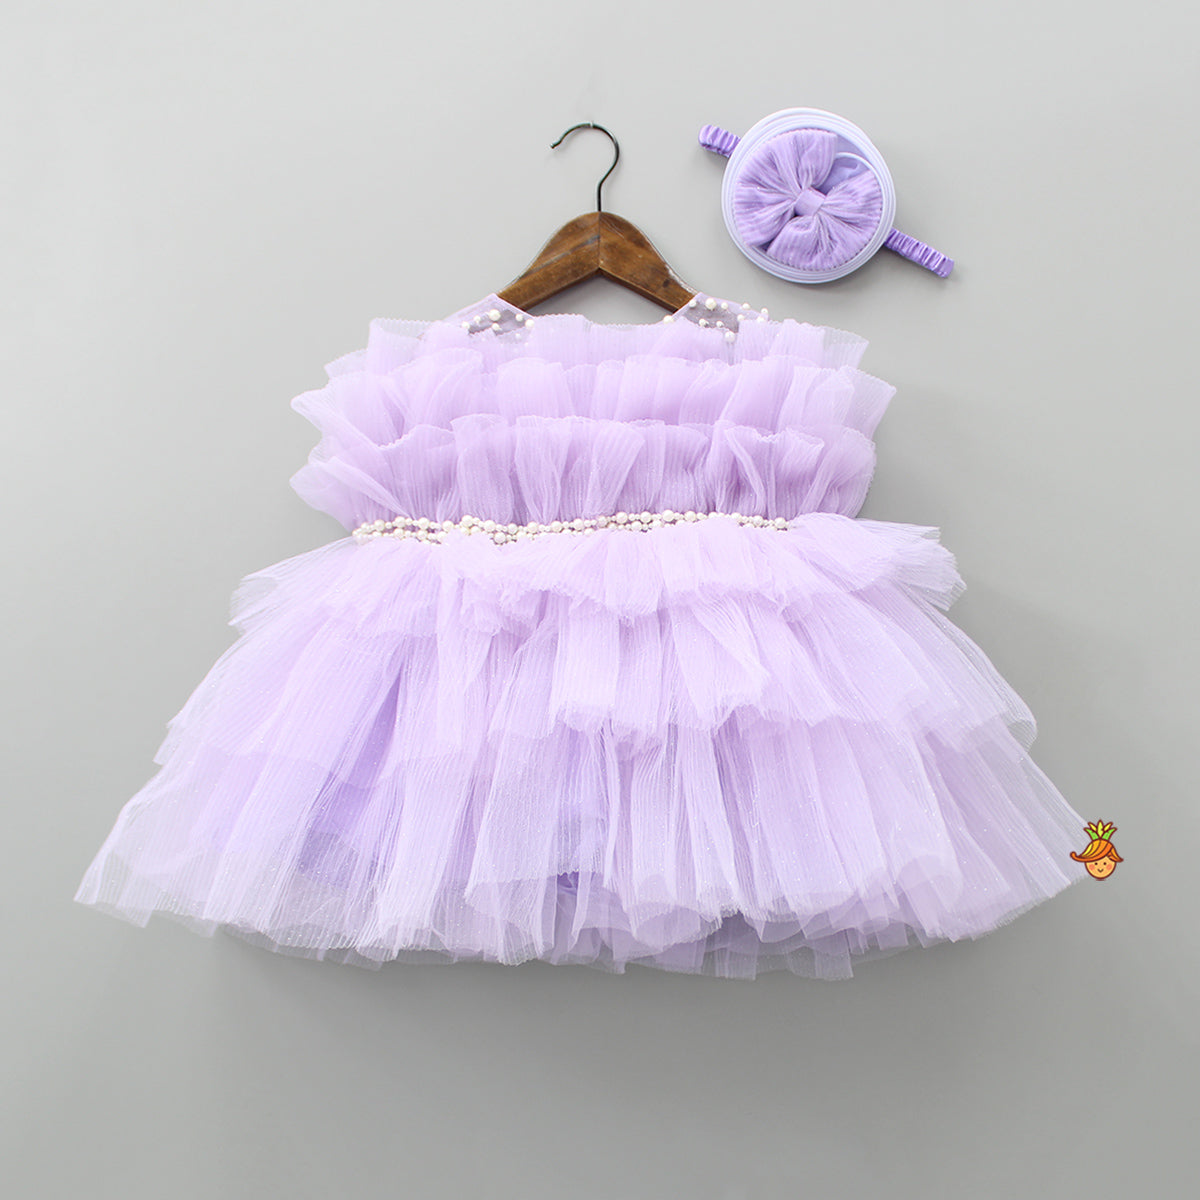 Elegant Lilac Layered Dress With Matching Spiral Bowie Head Band